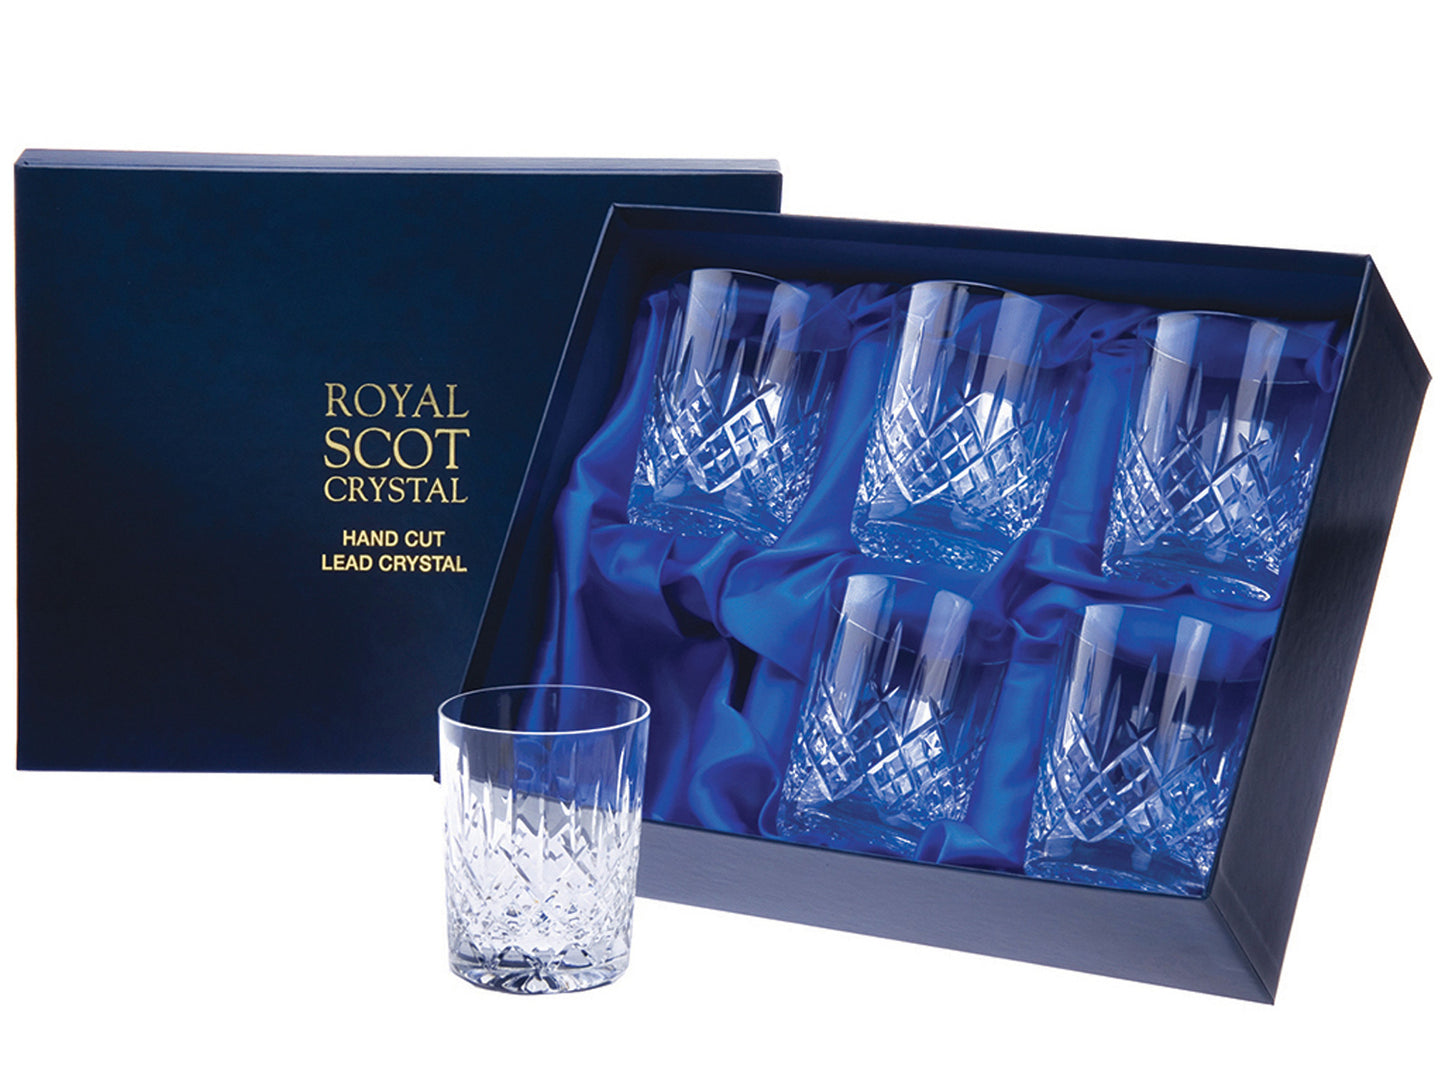 A set of six small whisky glasses with a cut design around the outside. The pattern has a bed of diamondsa round the base, topped with single flicks going up towards the smooth rim. They come in a navy-blue silk-lined presentation box